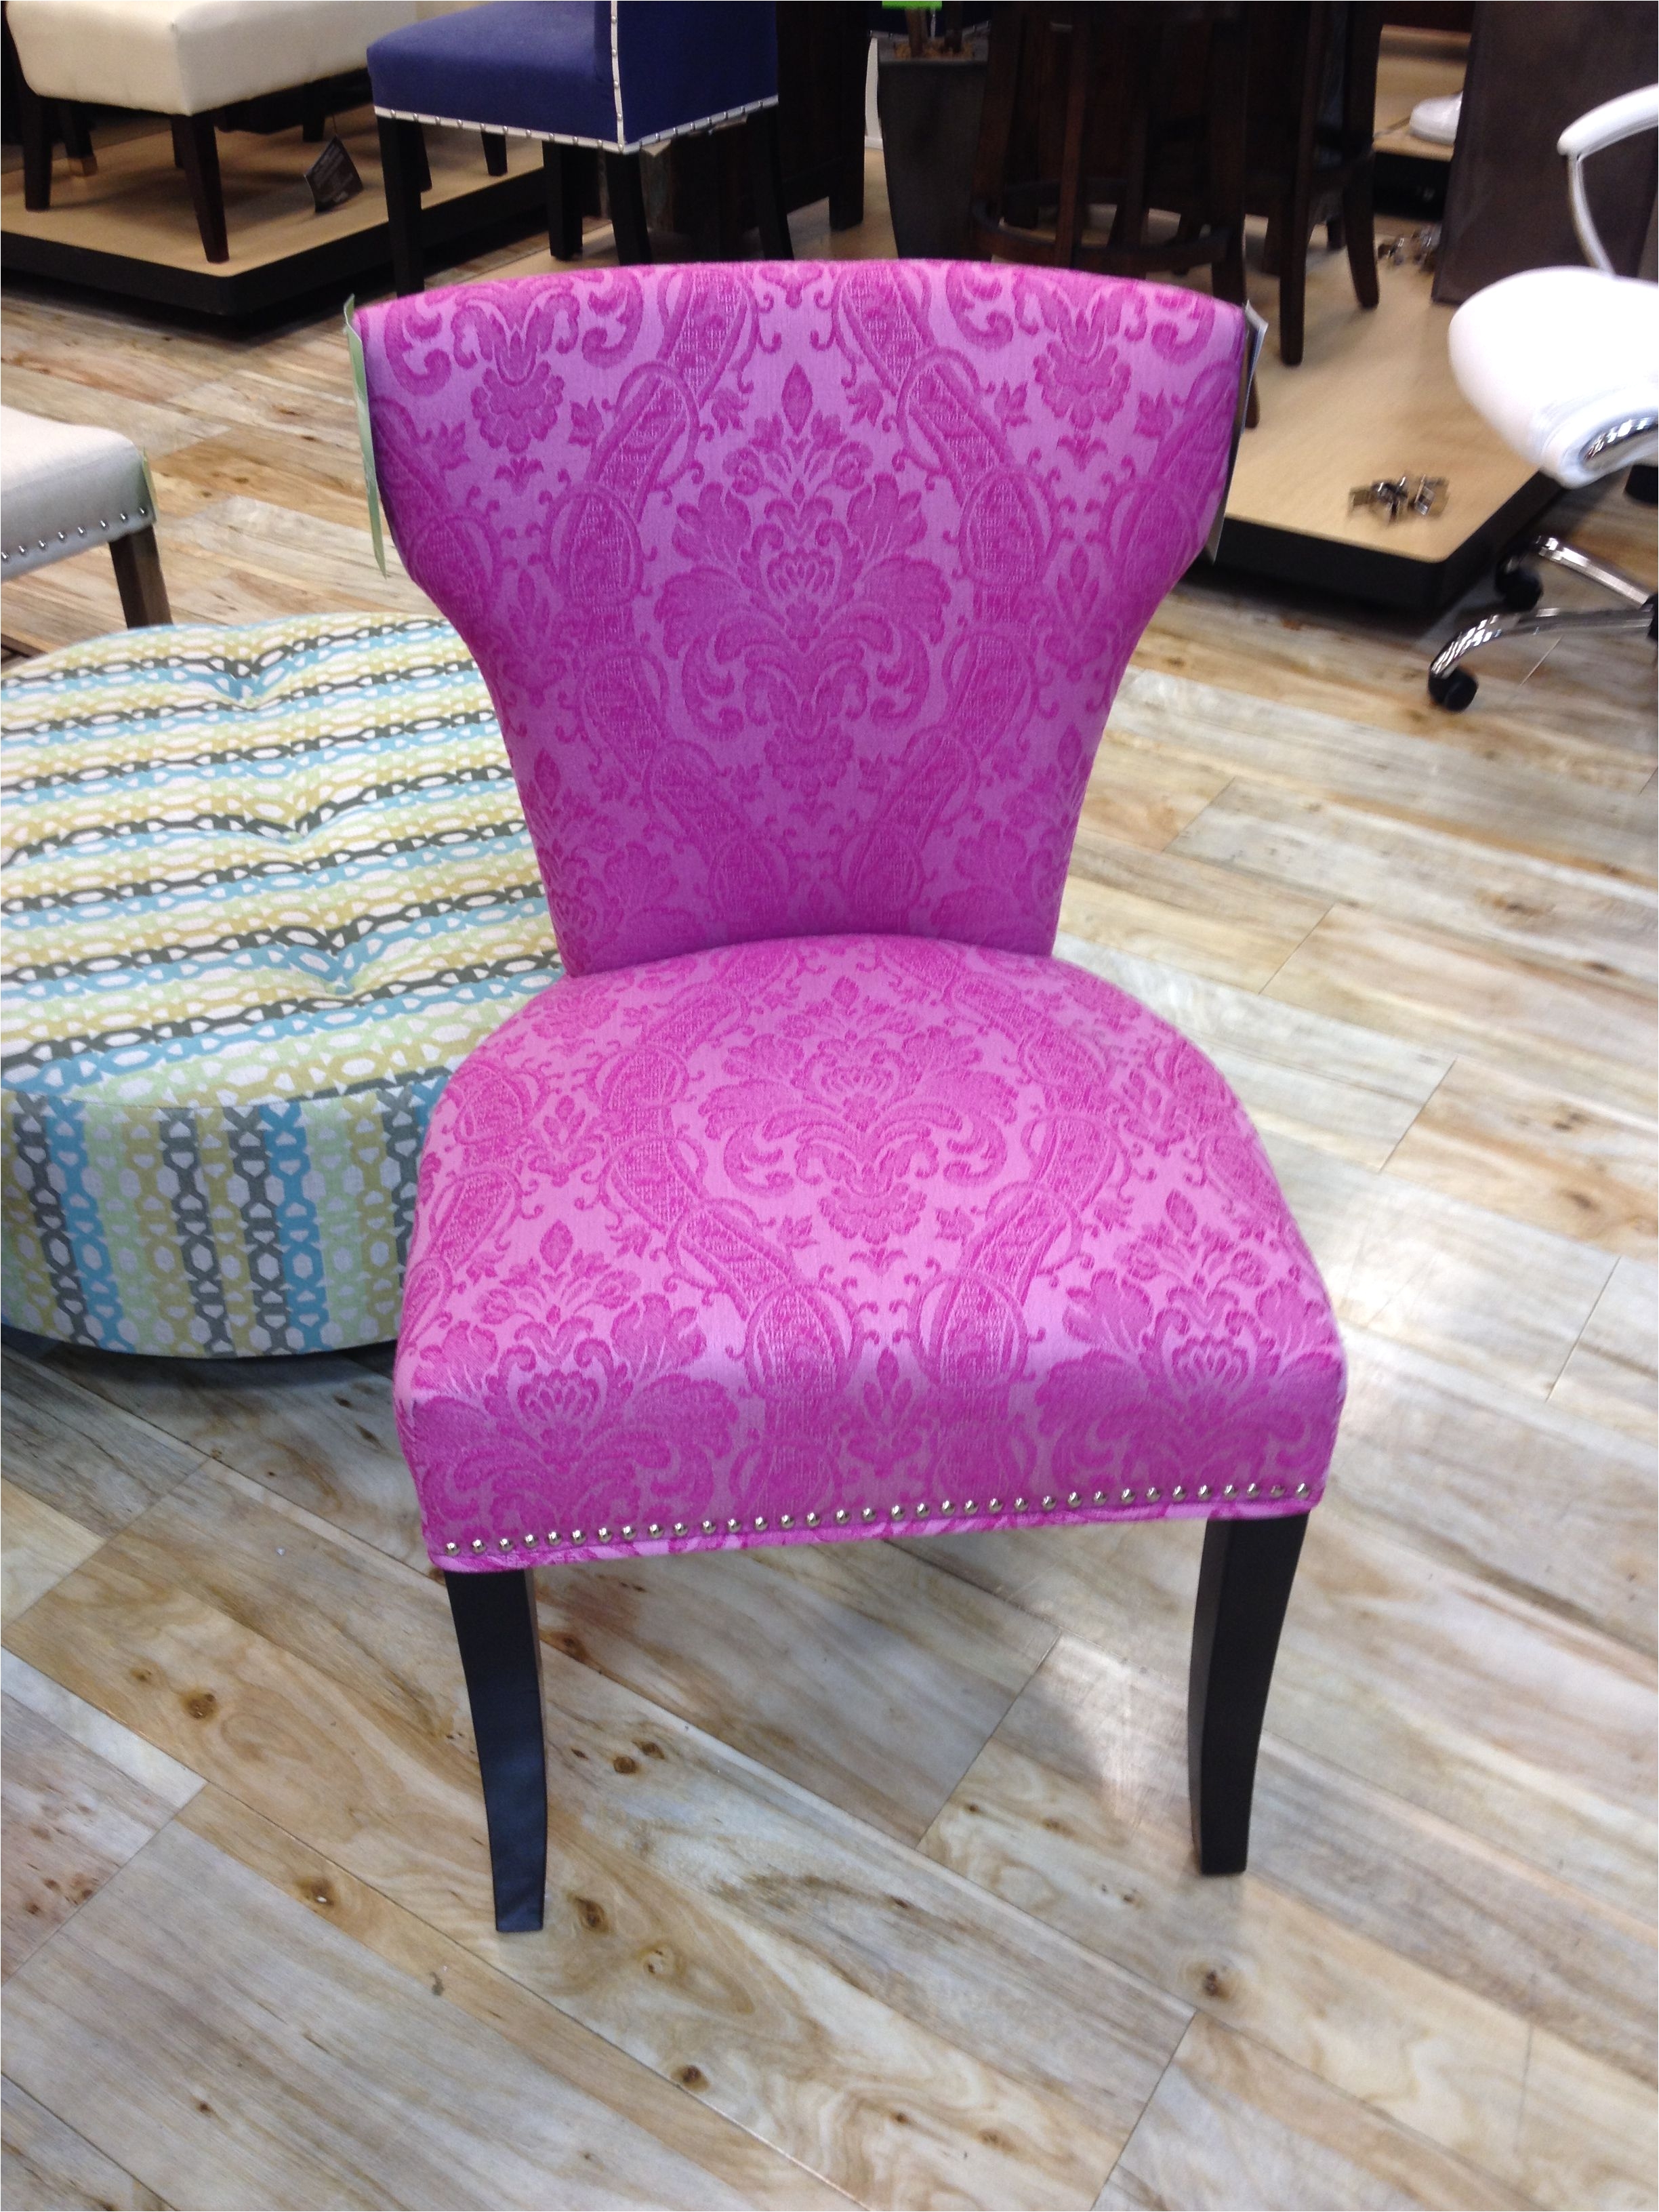 cynthia rowley chair at home goods 129 i just bought this in a really pretty blue for 99 but same exact style